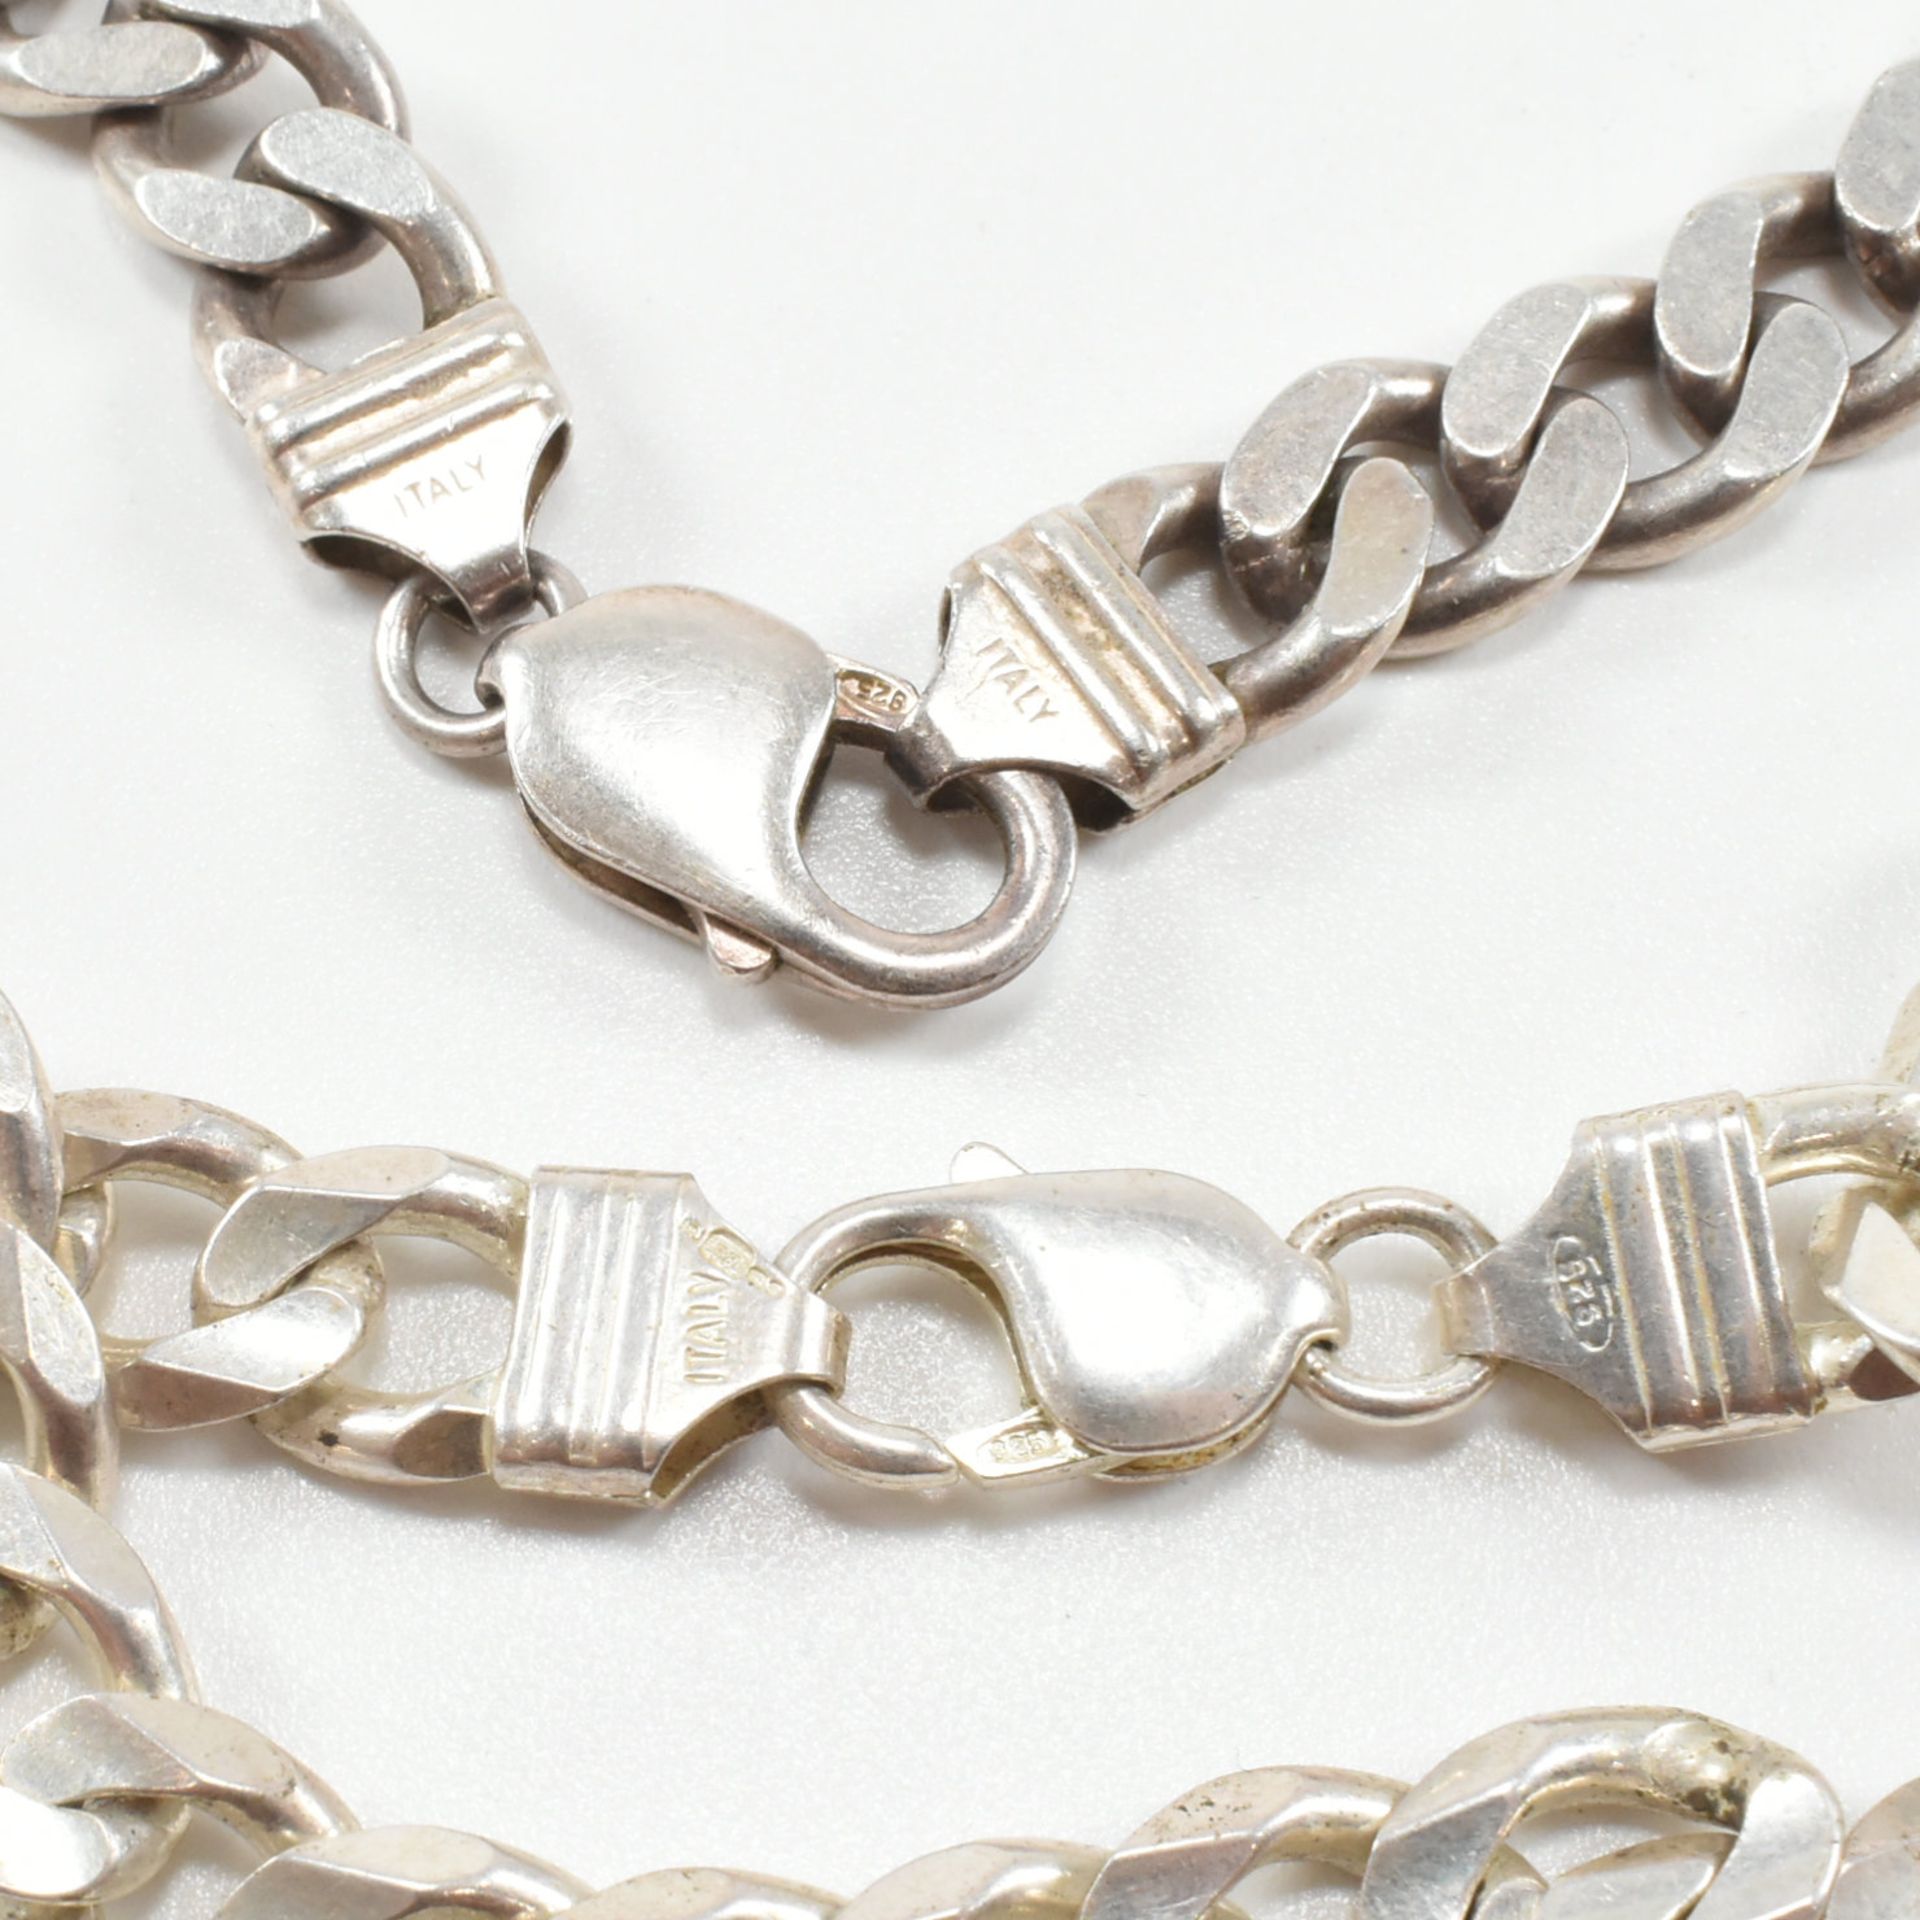 CONTEMPORARY ITALIAN 925 SILVER CURB LINK CHAIN & BRACELET - Image 7 of 7